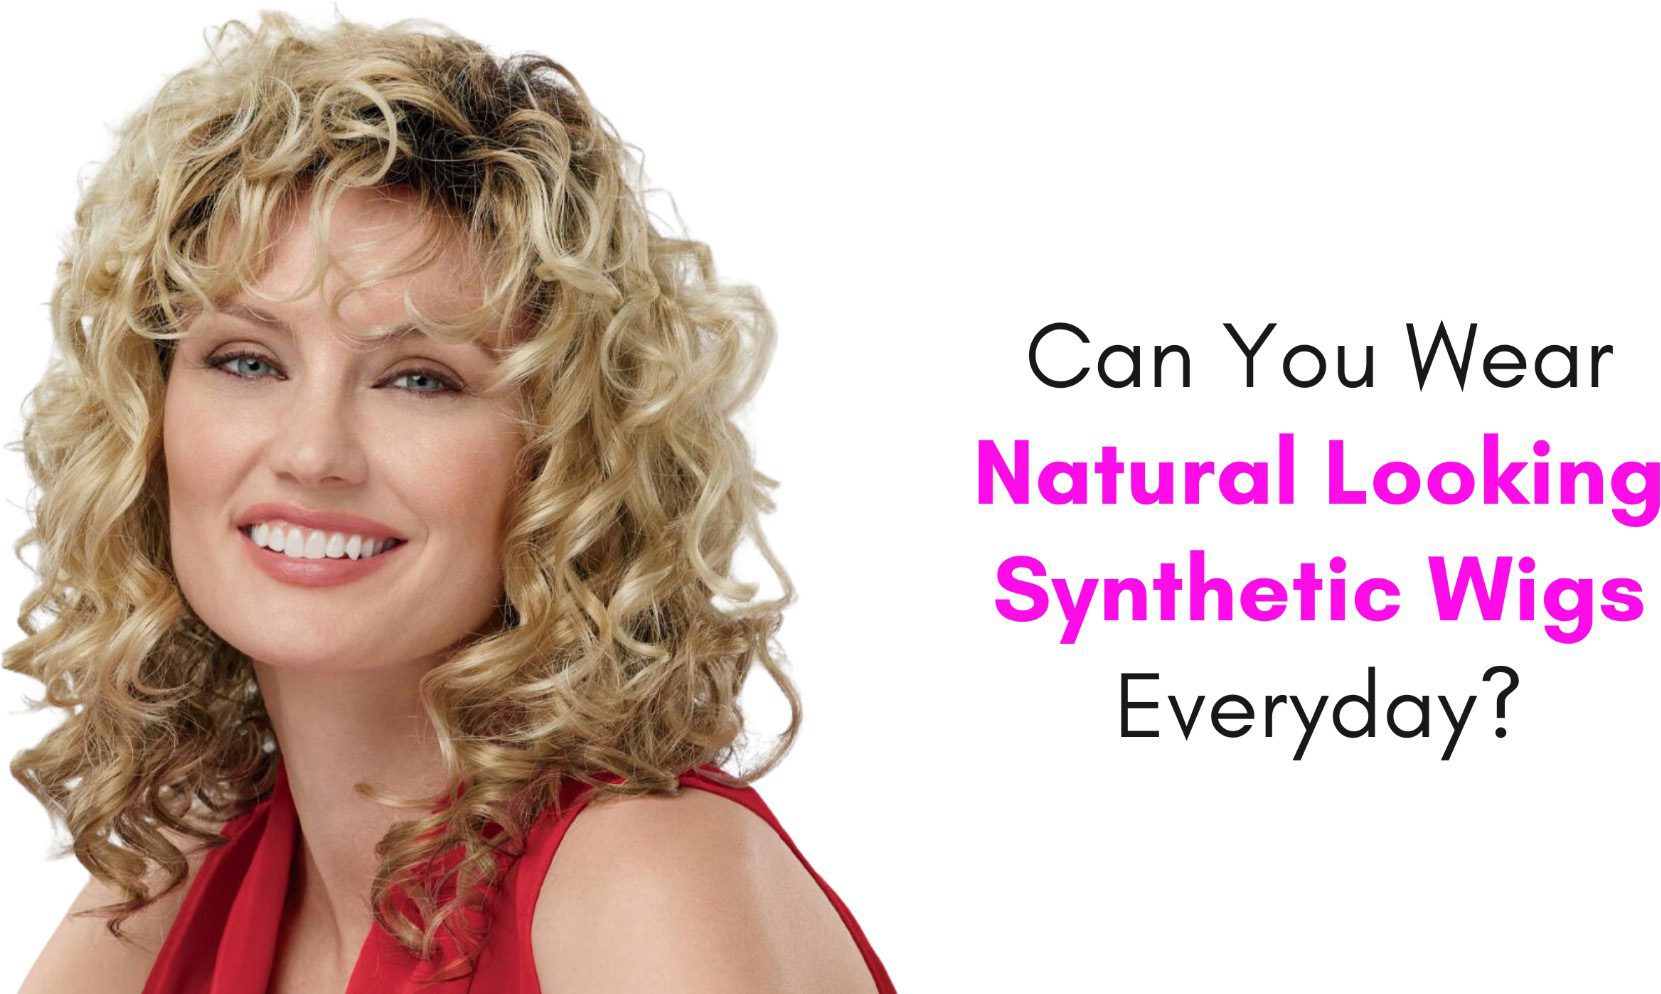 Can You Wear Natural Looking Synthetic Wigs Everyday?